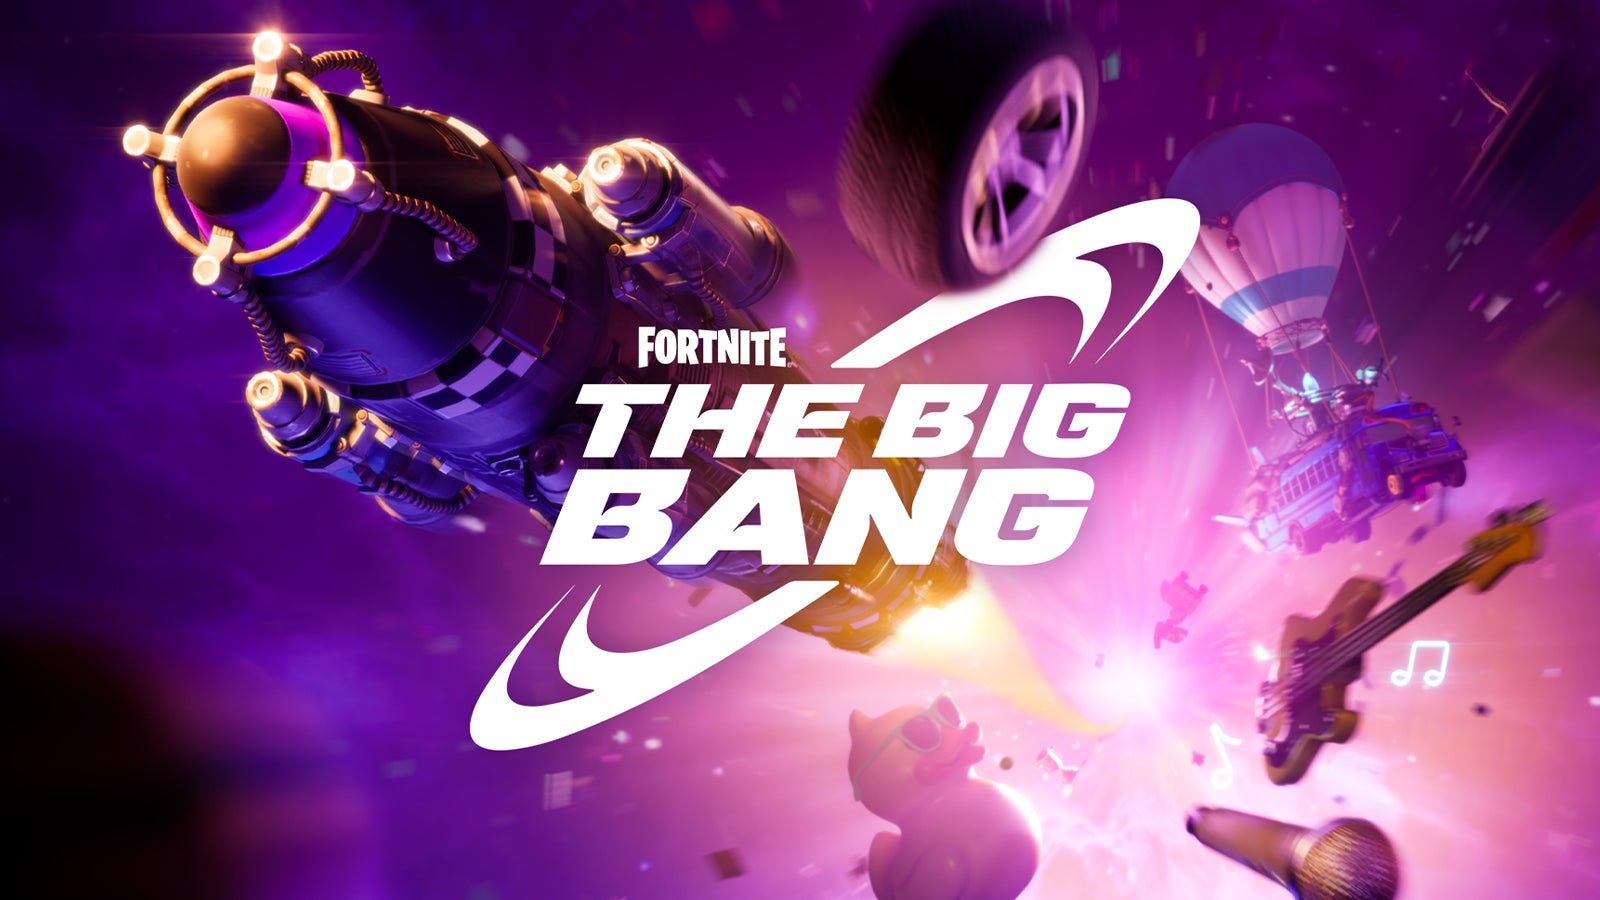 Fortnite Big Bang live event replay start time for GMT, CET, ET